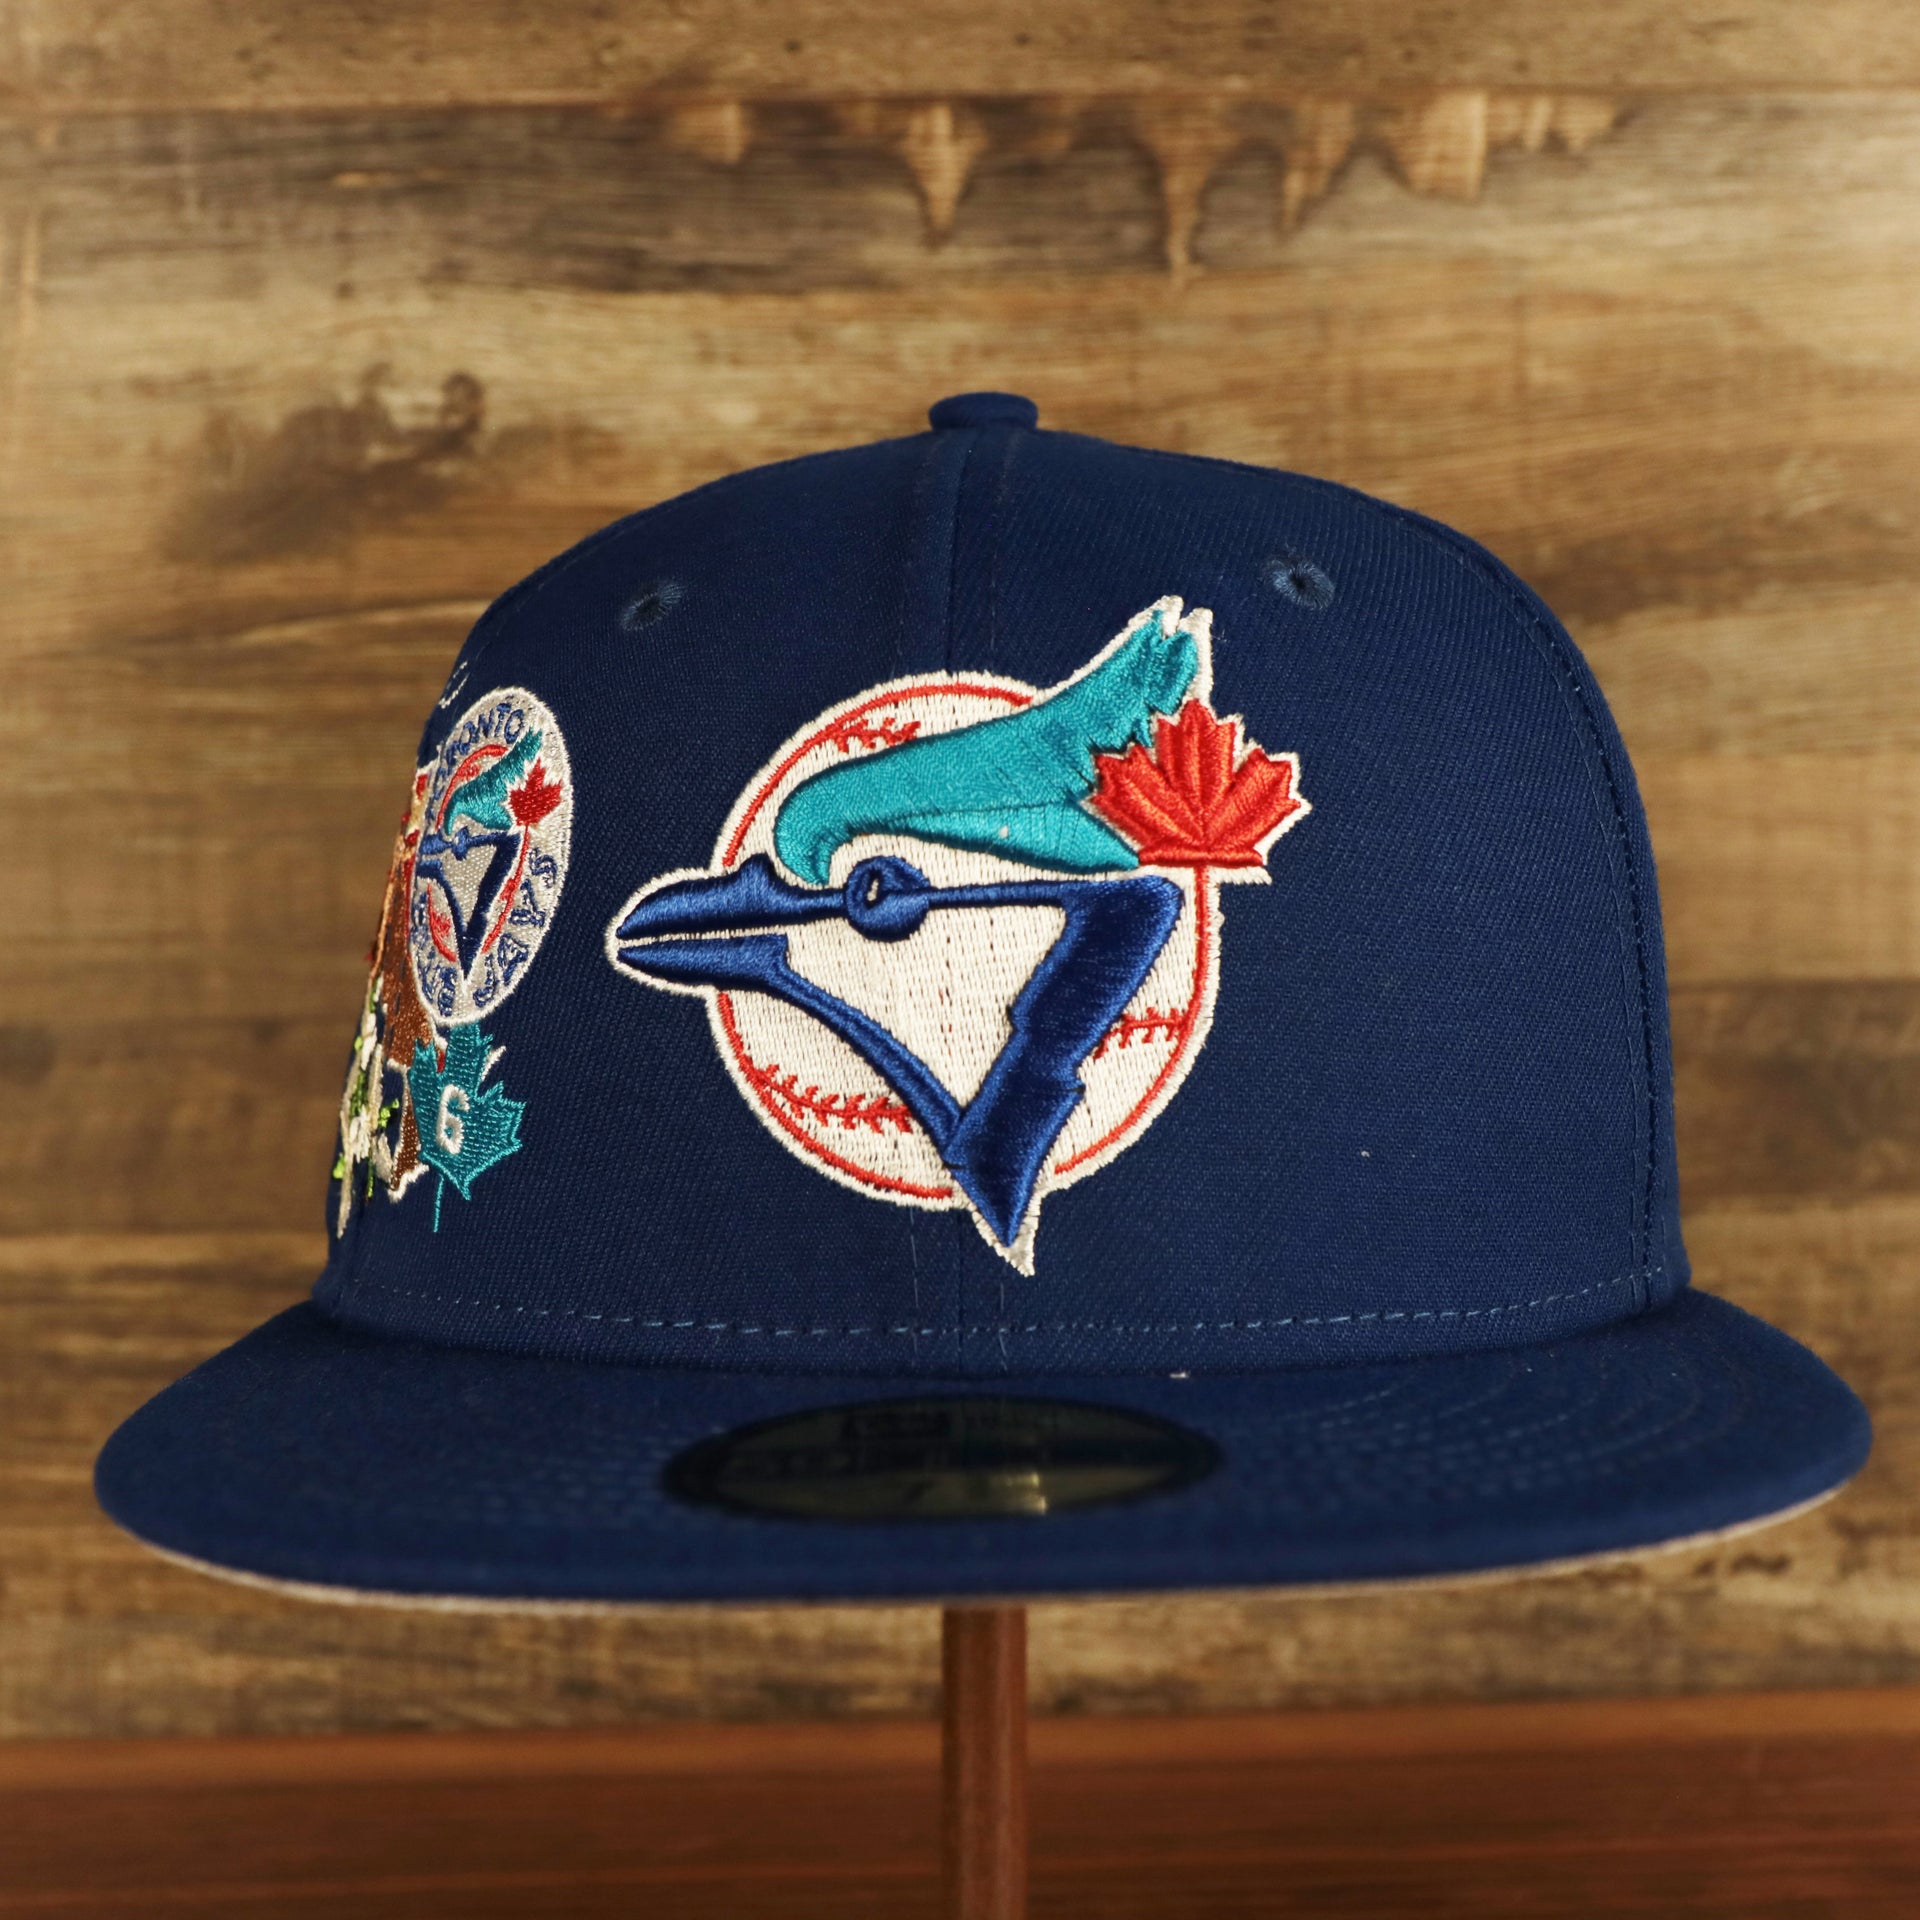 Toronto Blue Jays "City Cluster" Side Patch Gray Bottom Royal 59Fifty Fitted Cap